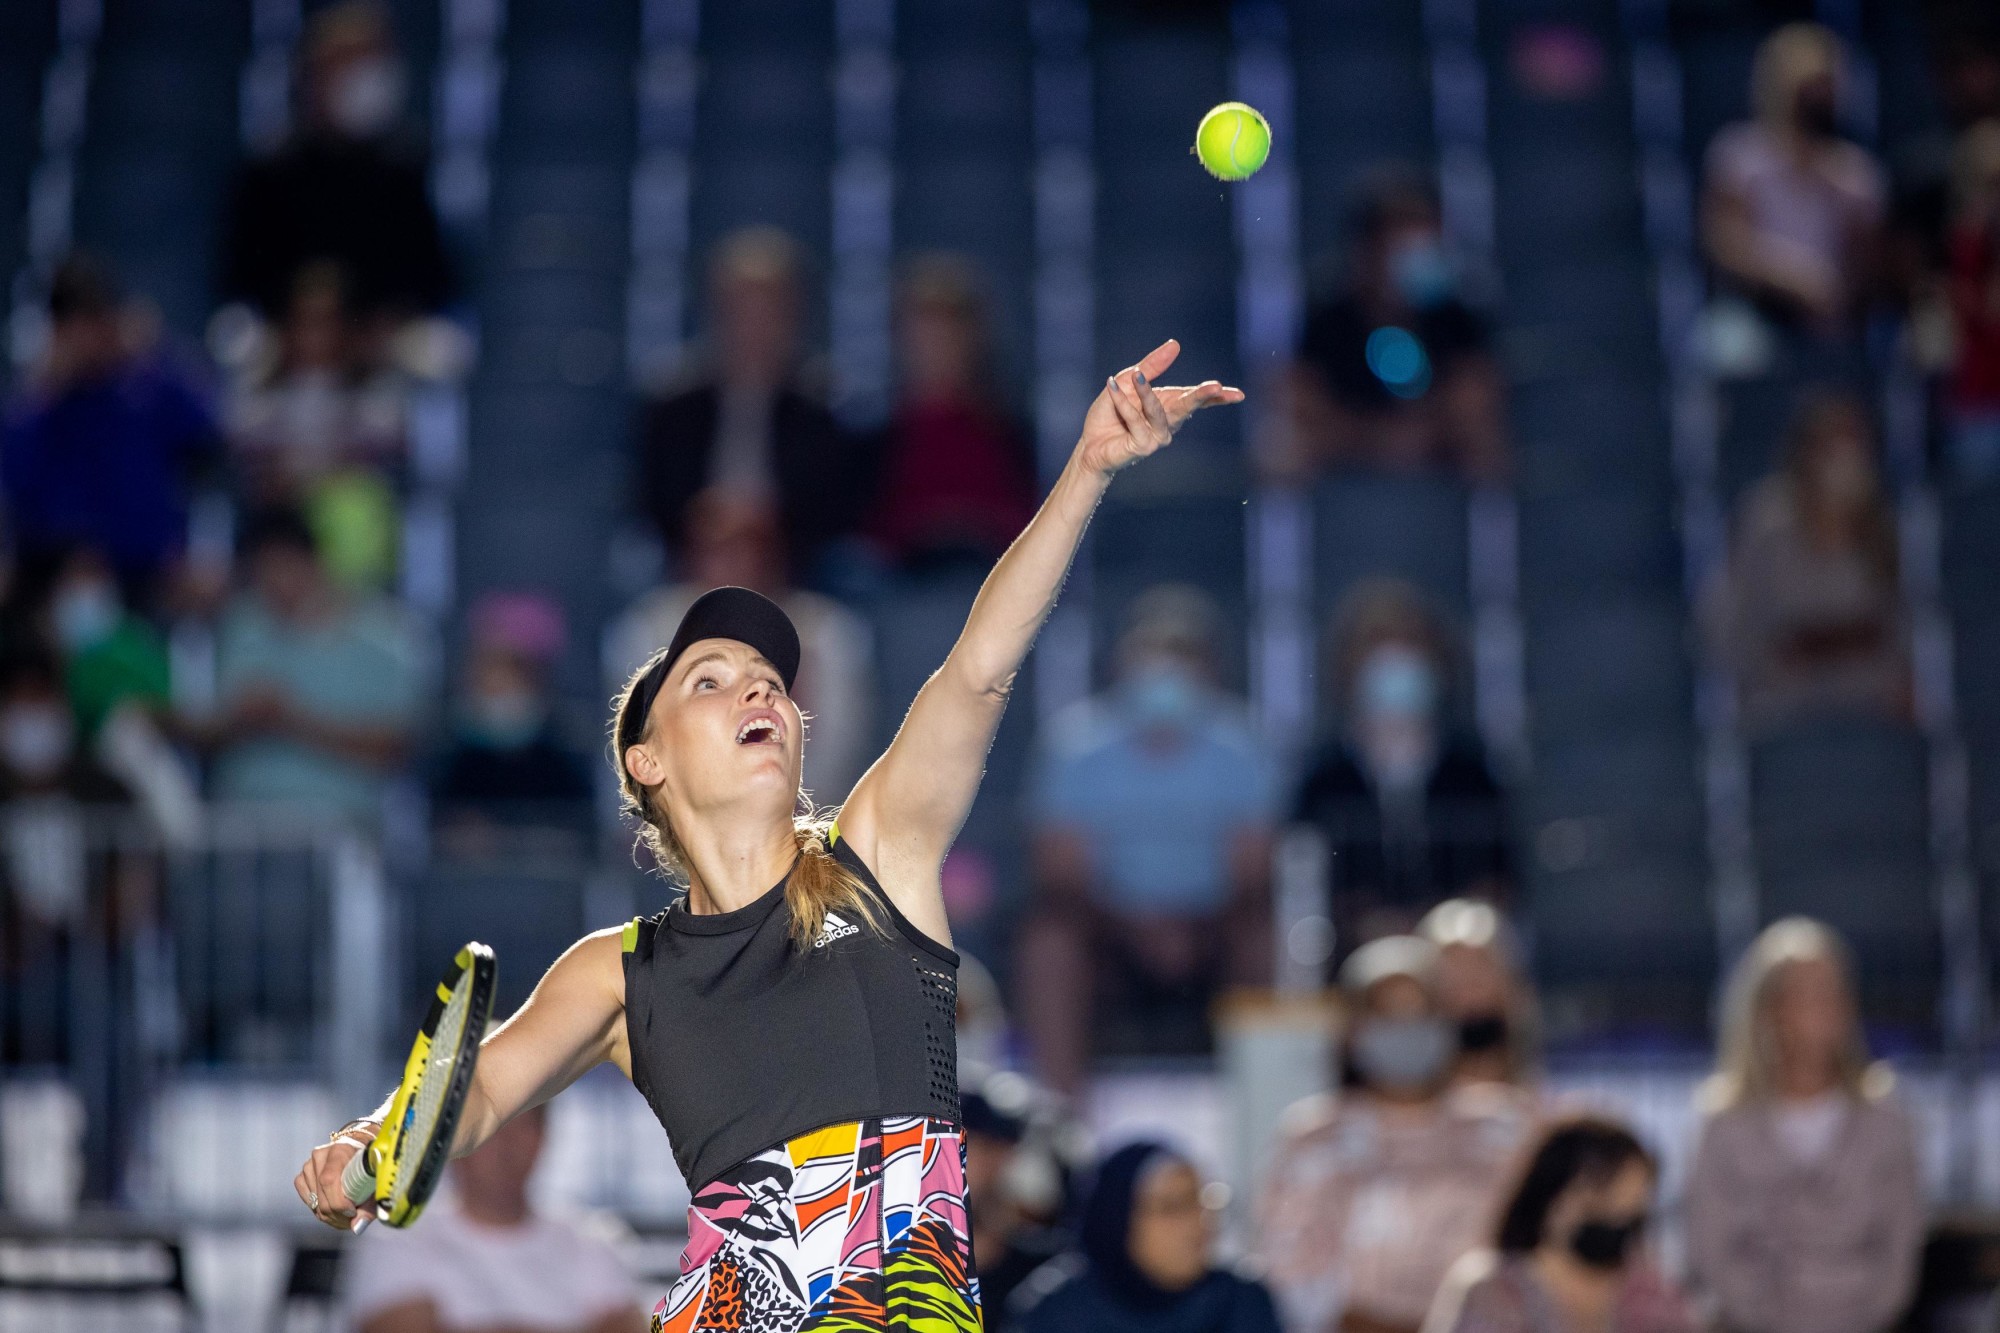 Tennis legend Caroline Wozniacki in action during the Women’s Singles Exhibition Game against Kim Clijsters for Expo 2020 Dubai Tennis Week at the Expo Sports Arena m52527